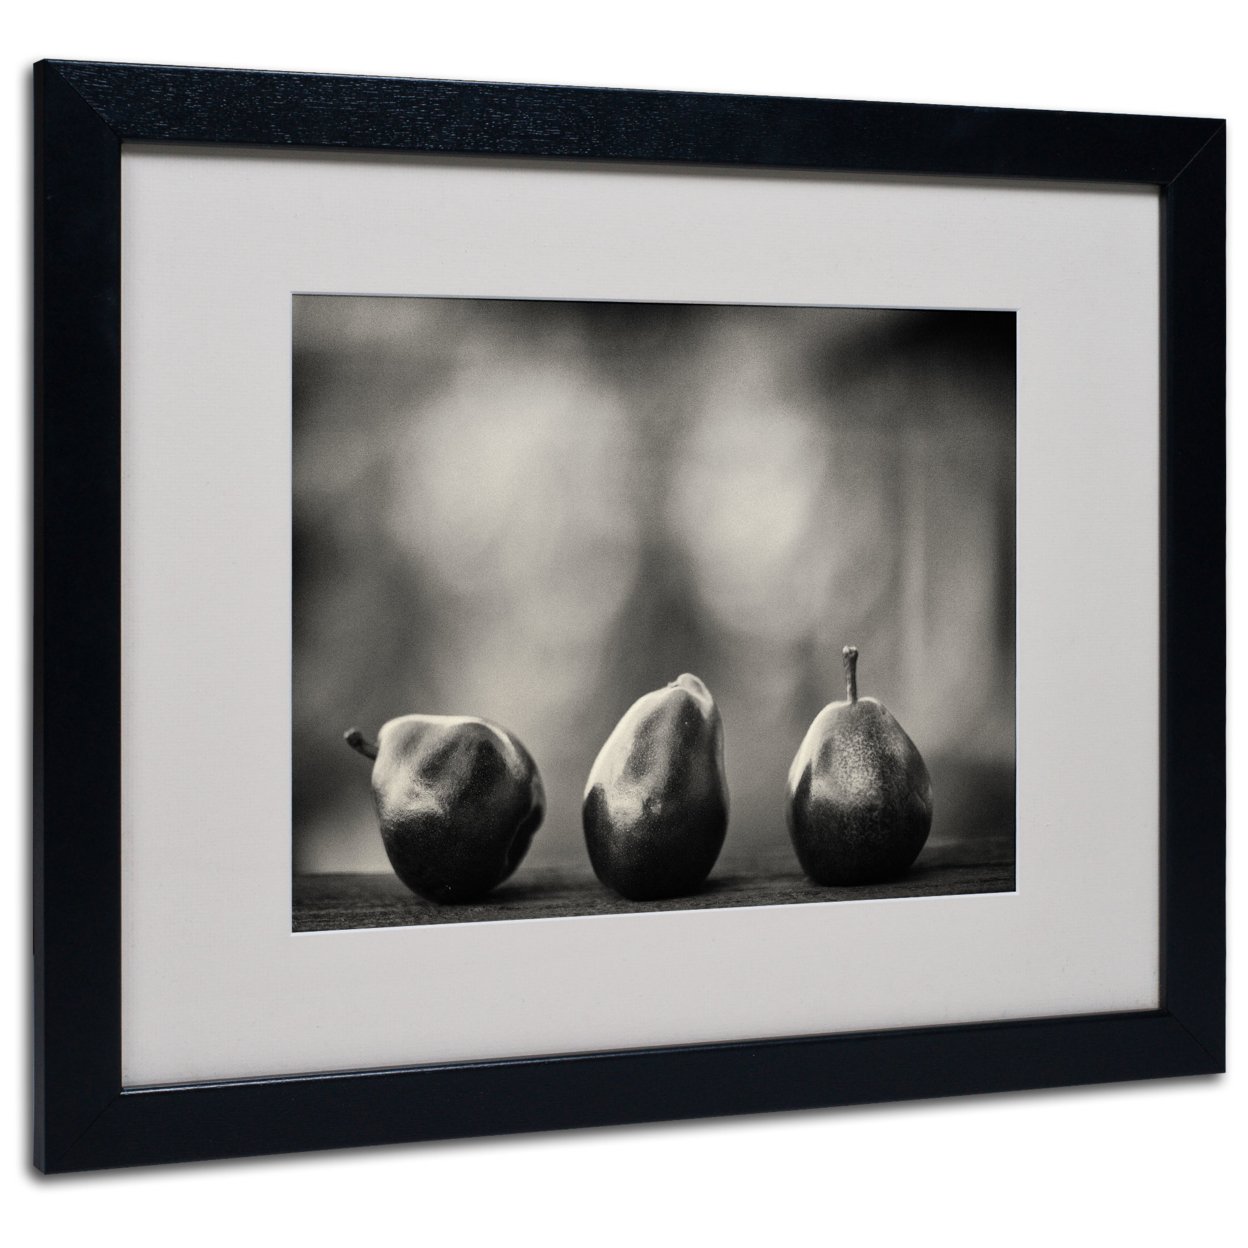 Geoffrey Ansel Agrons 'Three Red Pears' Black Wooden Framed Art 18 X 22 Inches